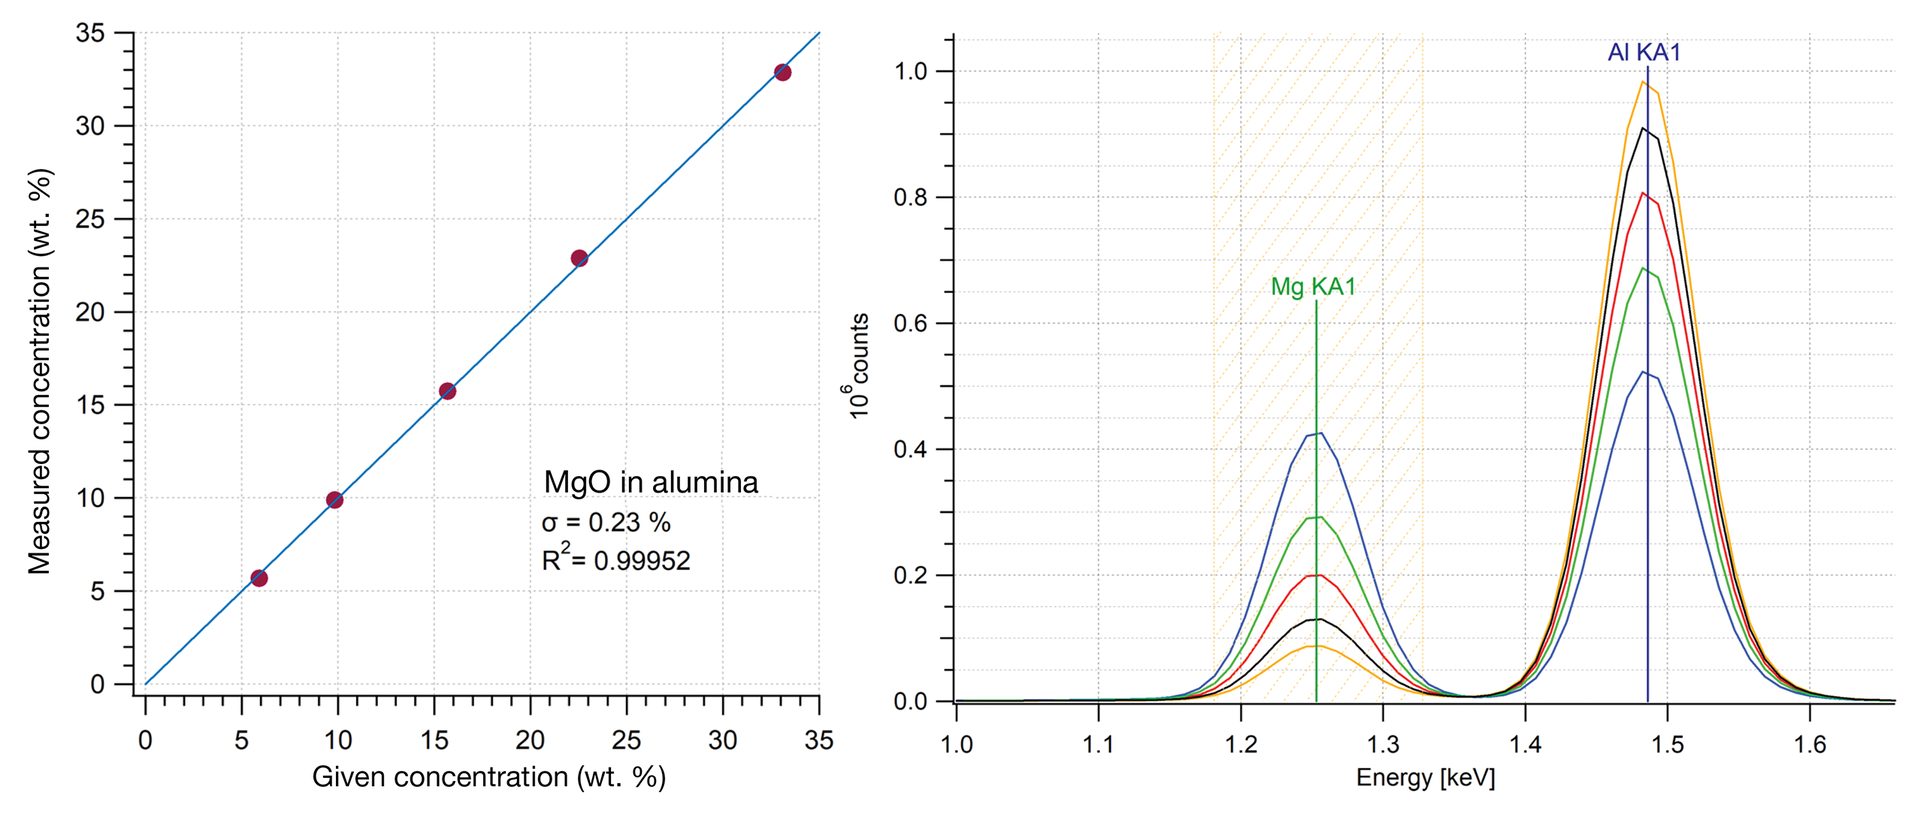 A calibration curve for measuring magnesia (MgO) in alumina (Al2O3) demonstrating very good linearity